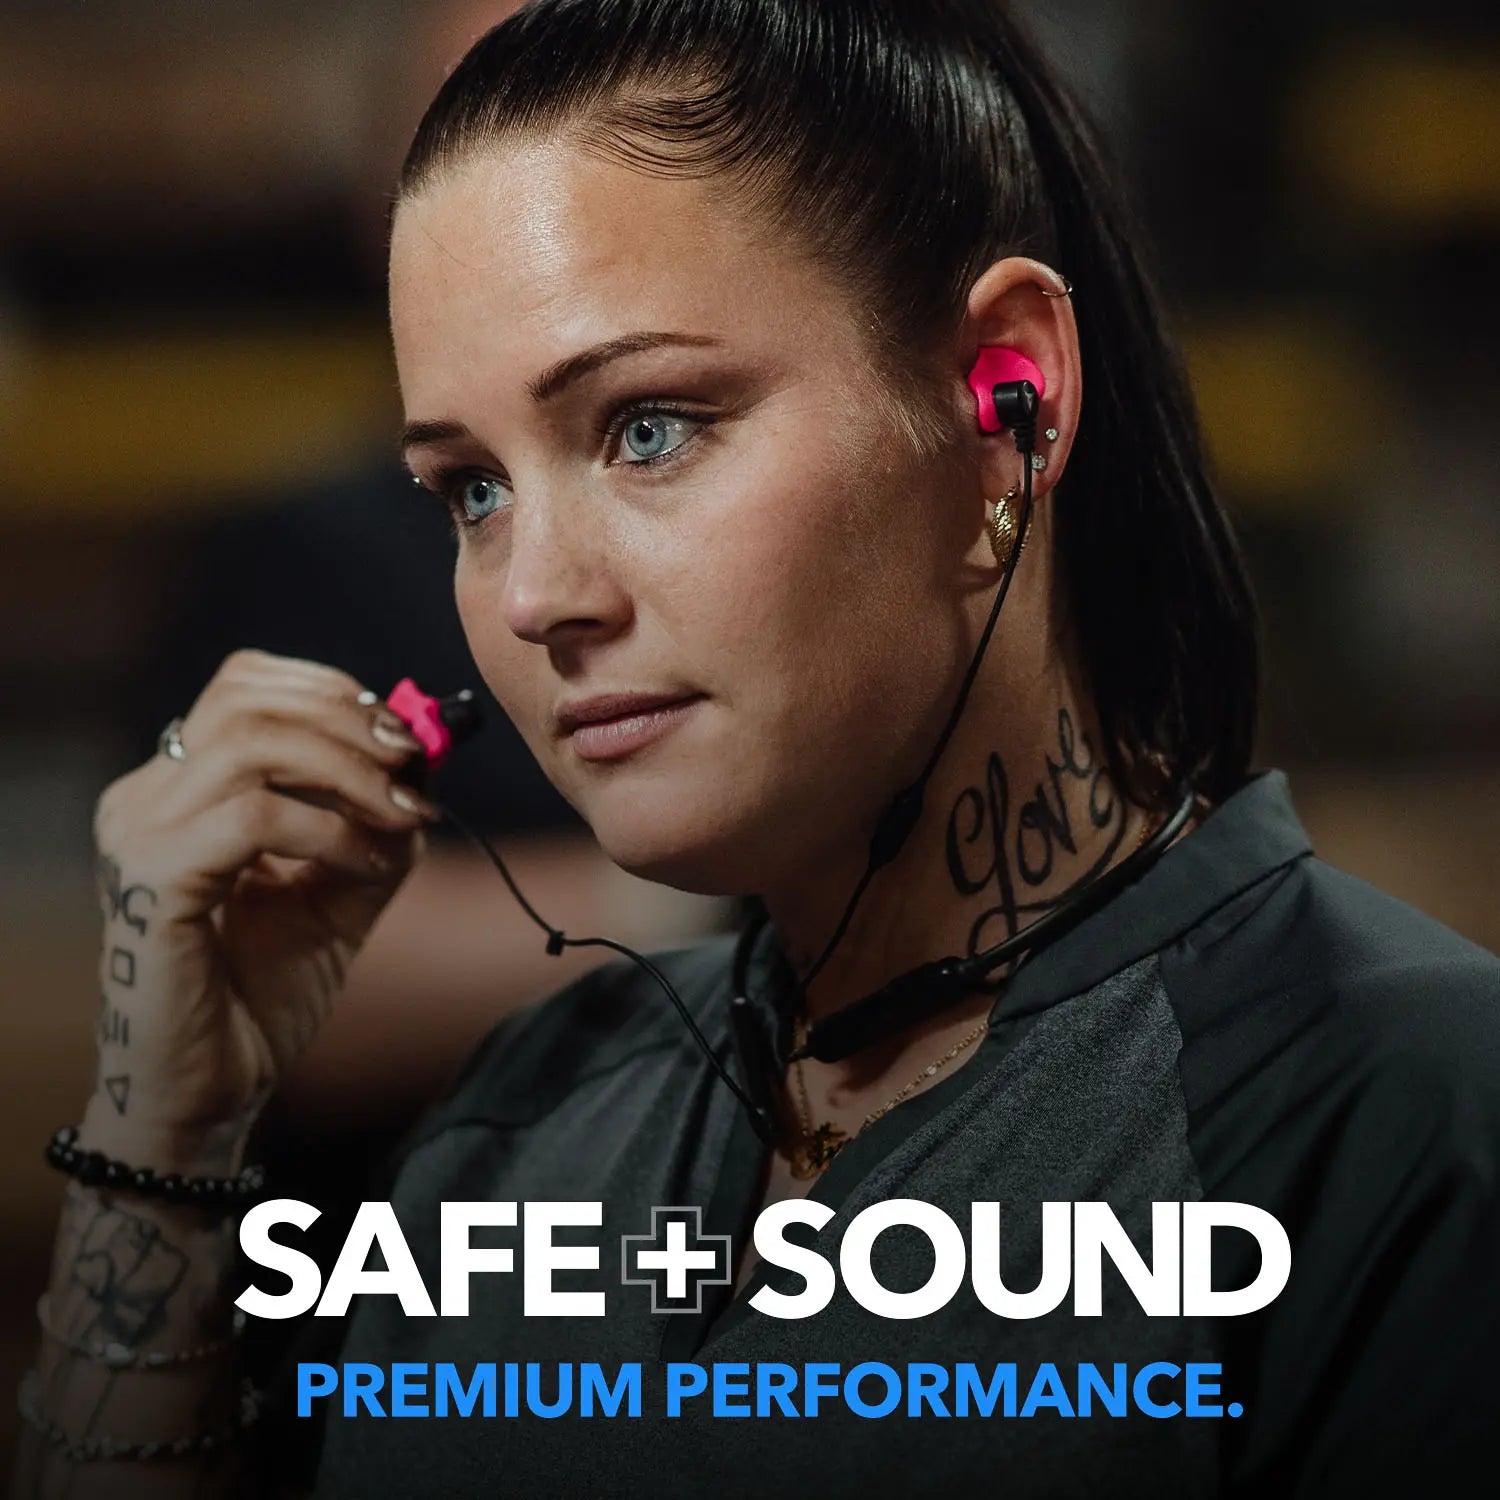 A person with a ponytail is putting pink SAFE + SOUND Custom Molded Bluetooth Wireless Earplug Headphones by Decibullz into their left ear. The text on their neck says "Love," and there is a small tattoo on their wrist. They are wearing a gray top, and the background is blurred. The text reads, "SAFE + SOUND PREMIUM PERFORMANCE.